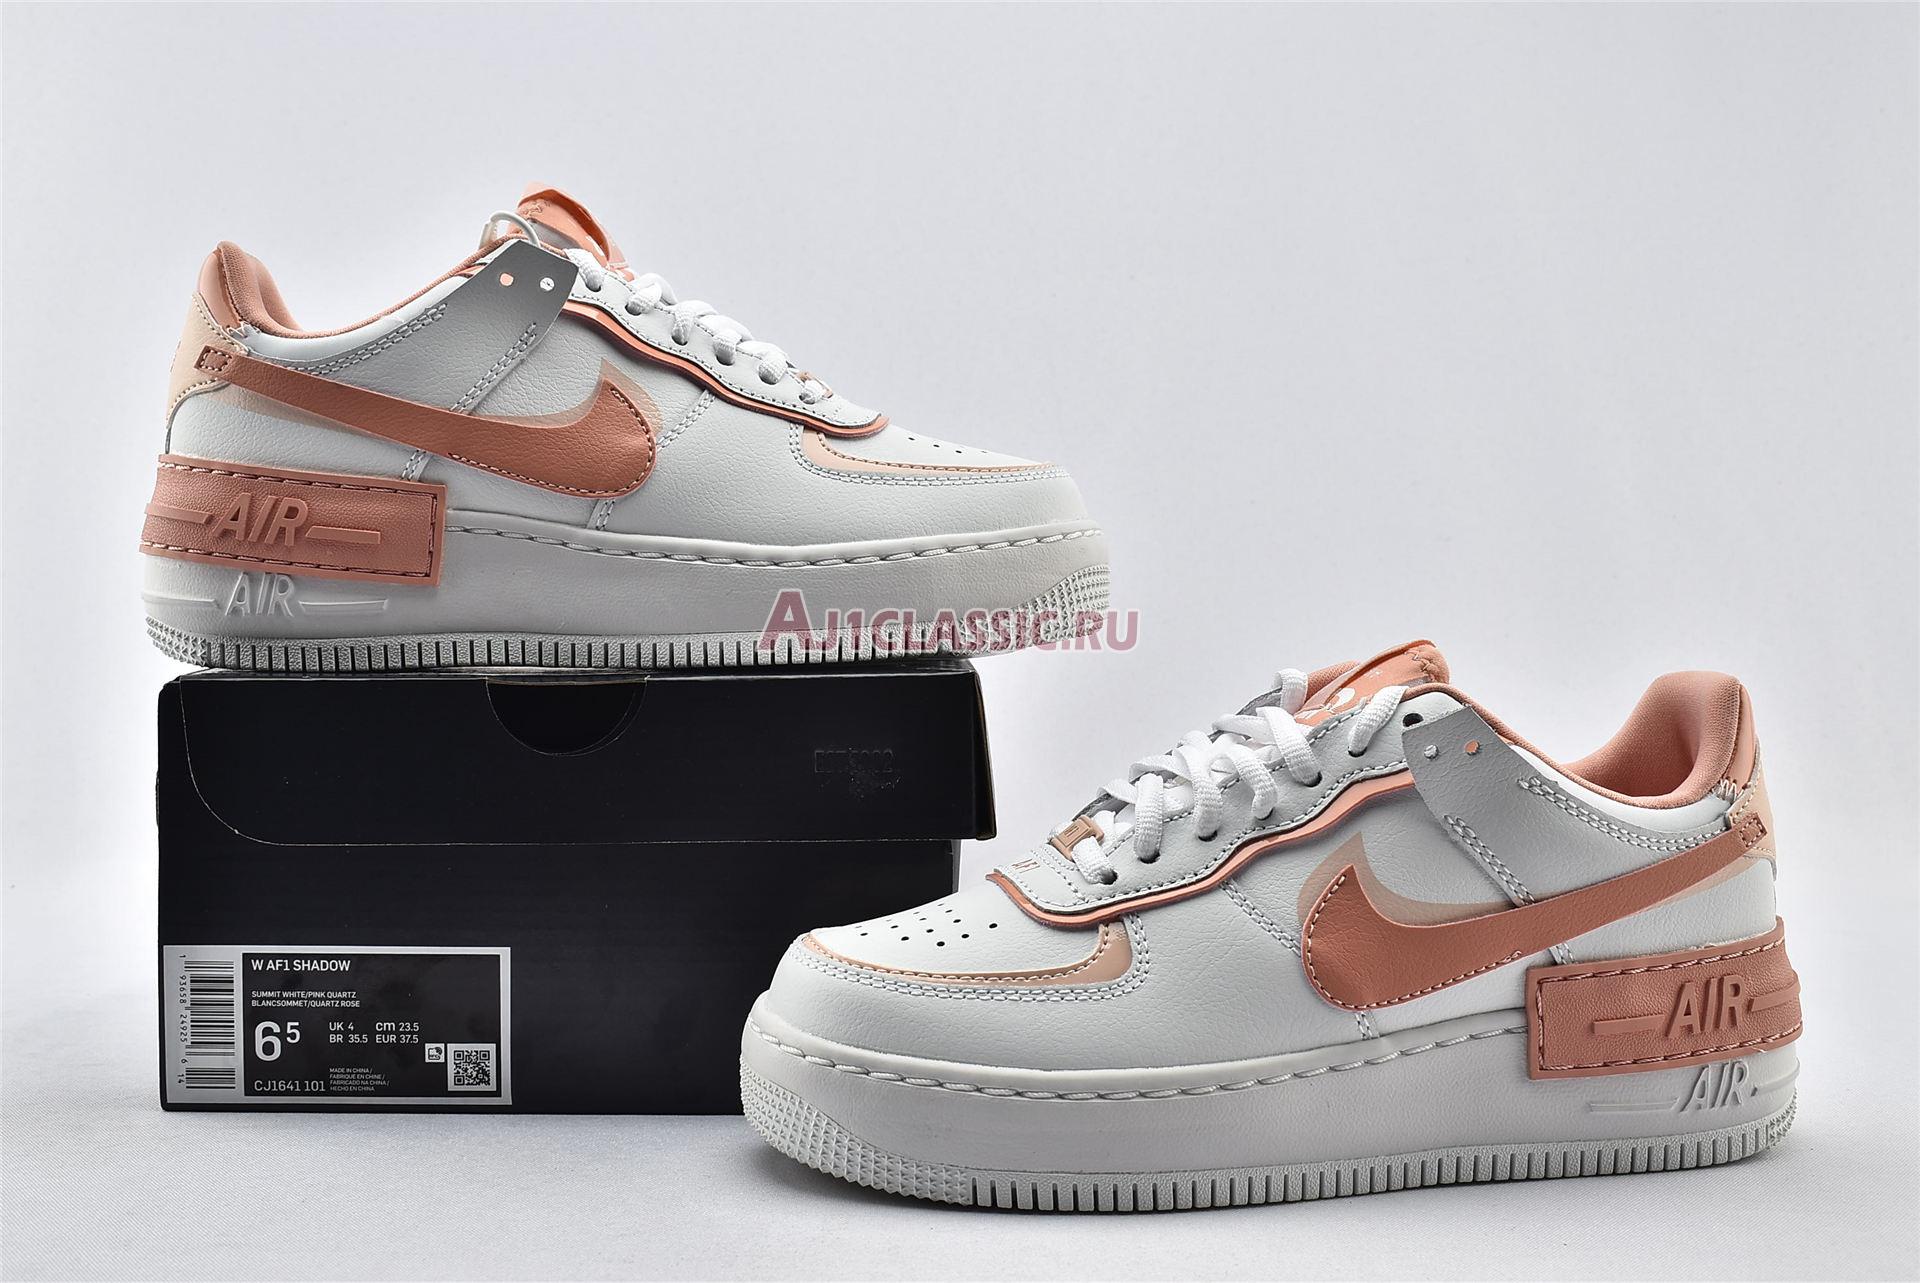 Nike Wmns Air Force 1 Shadow Washed Coral CJ1641-101 Summit White/Washed Coral/Summit White/Pink Quartz Sneakers